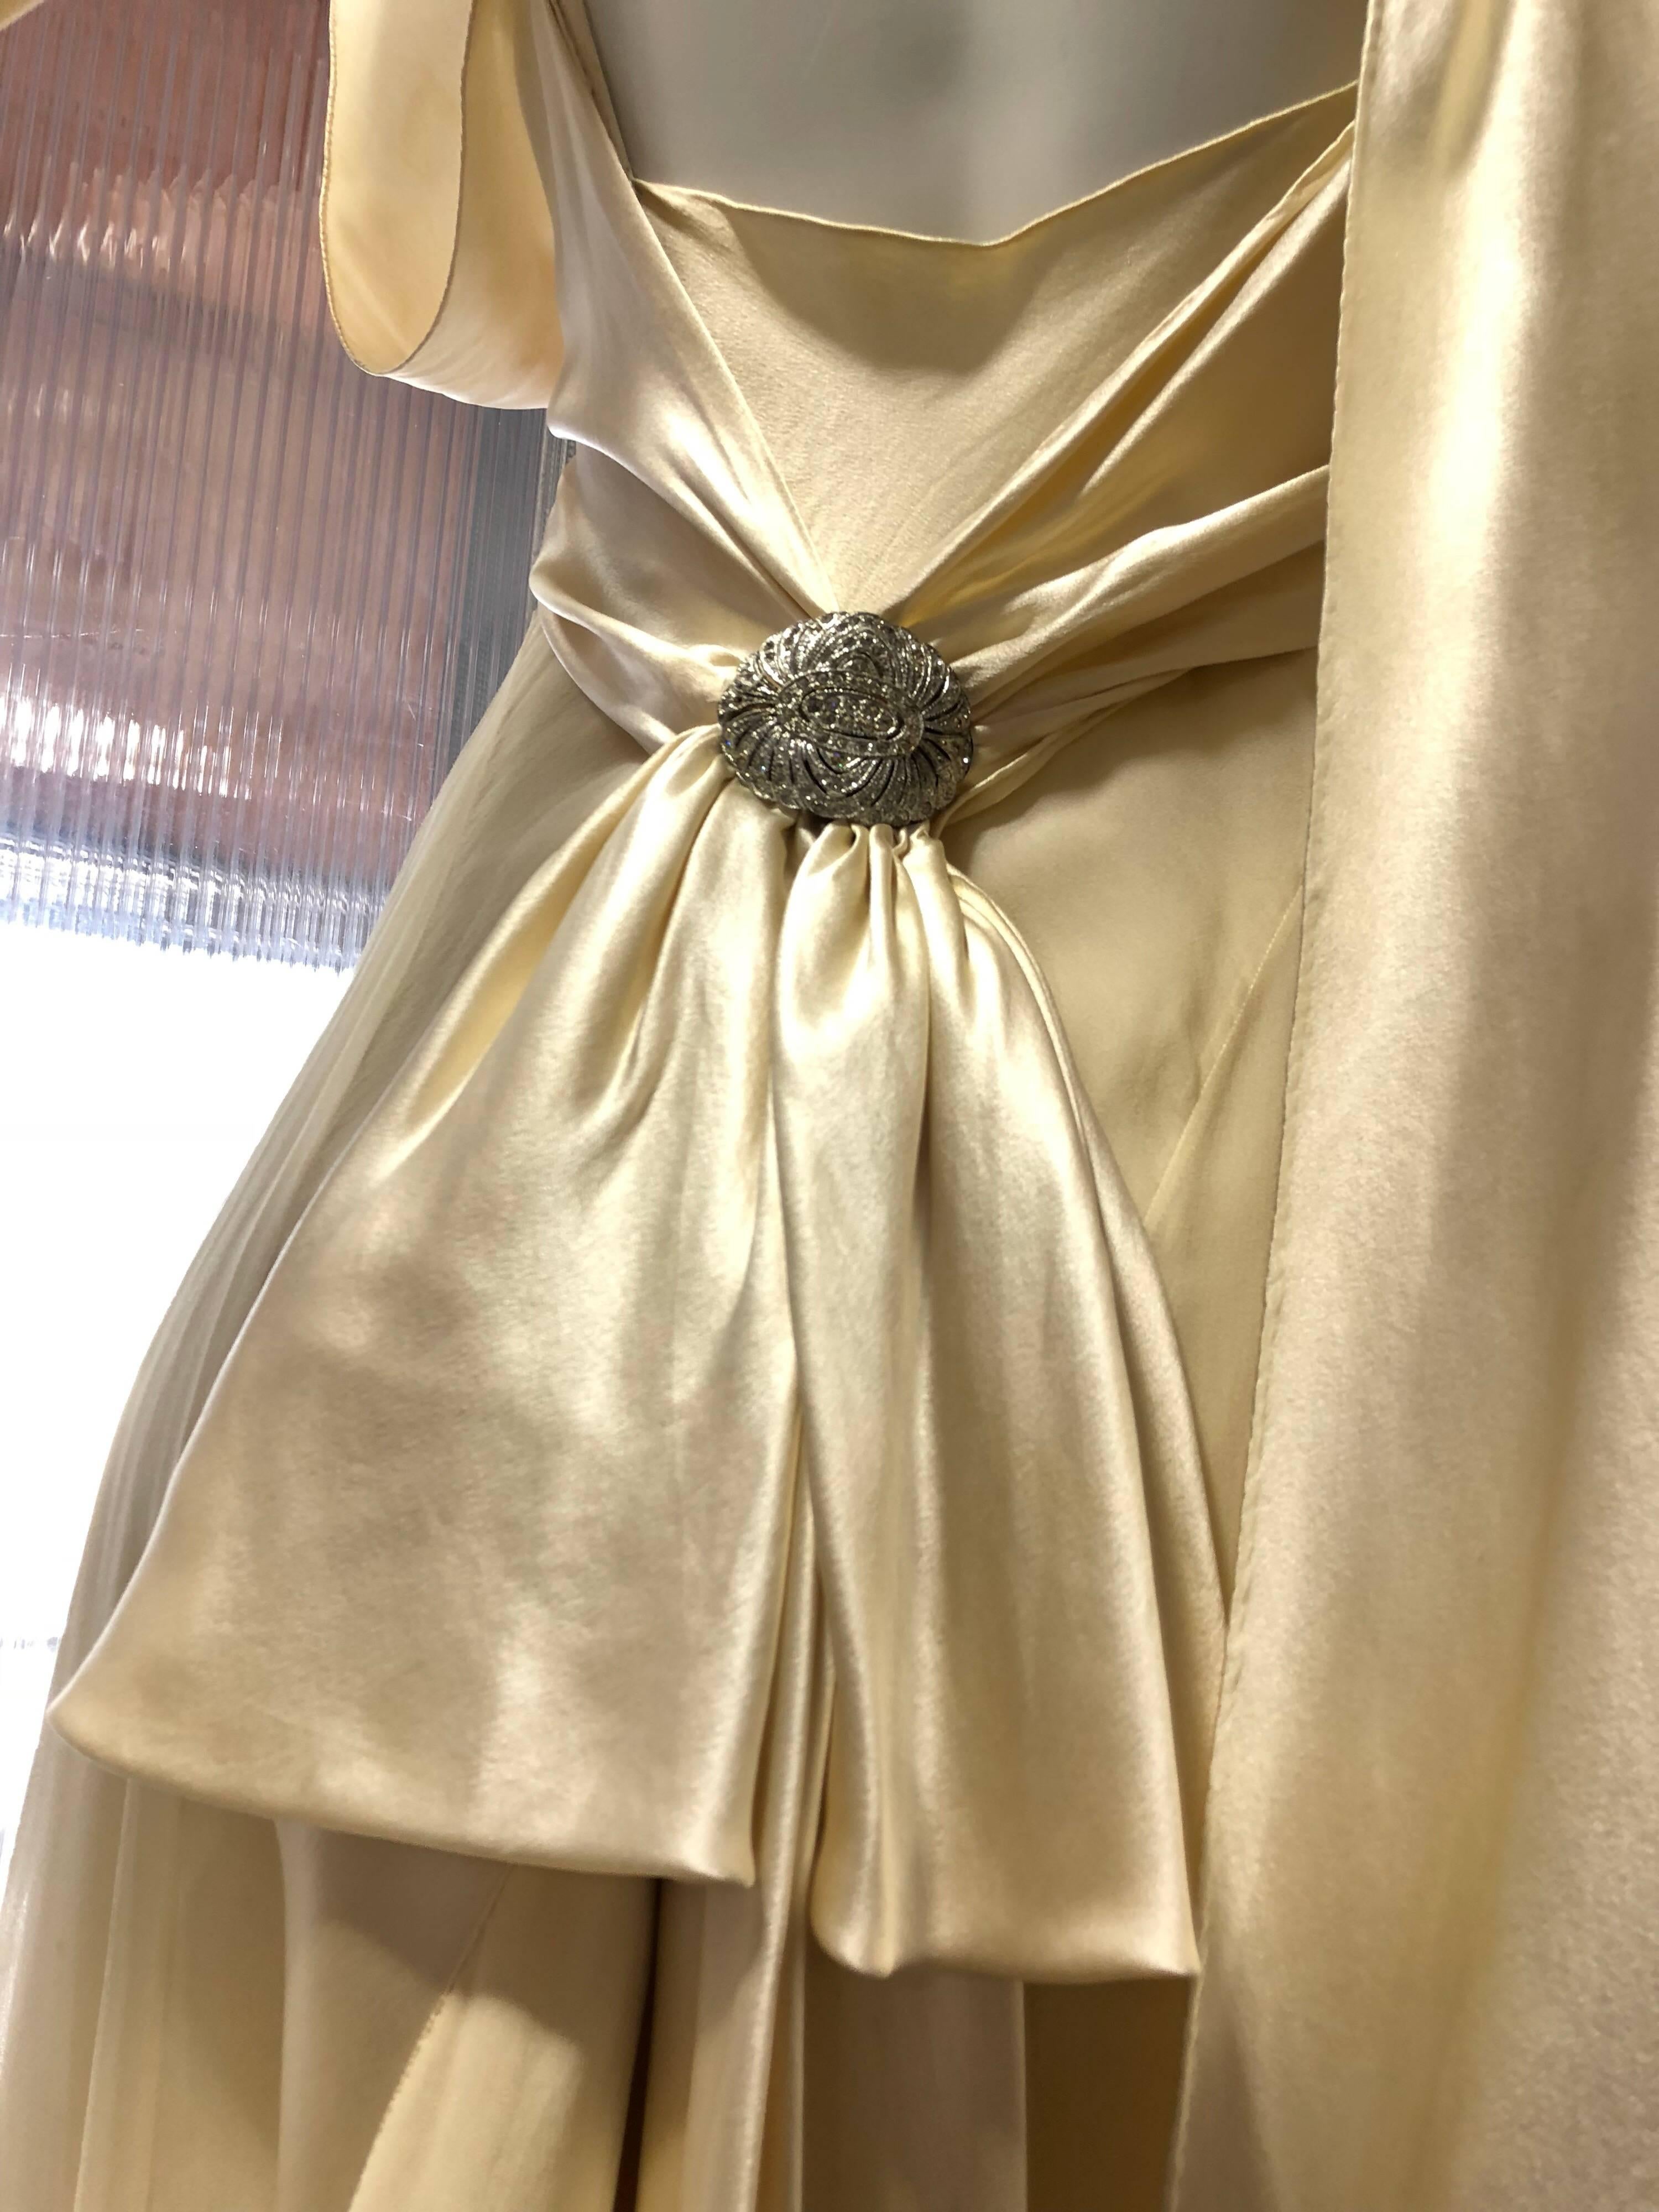 Hattie Carnegie Art Deco Bias Gown in Candlelight Silk Satin and Chiffon, 1930s  In Excellent Condition In Gresham, OR